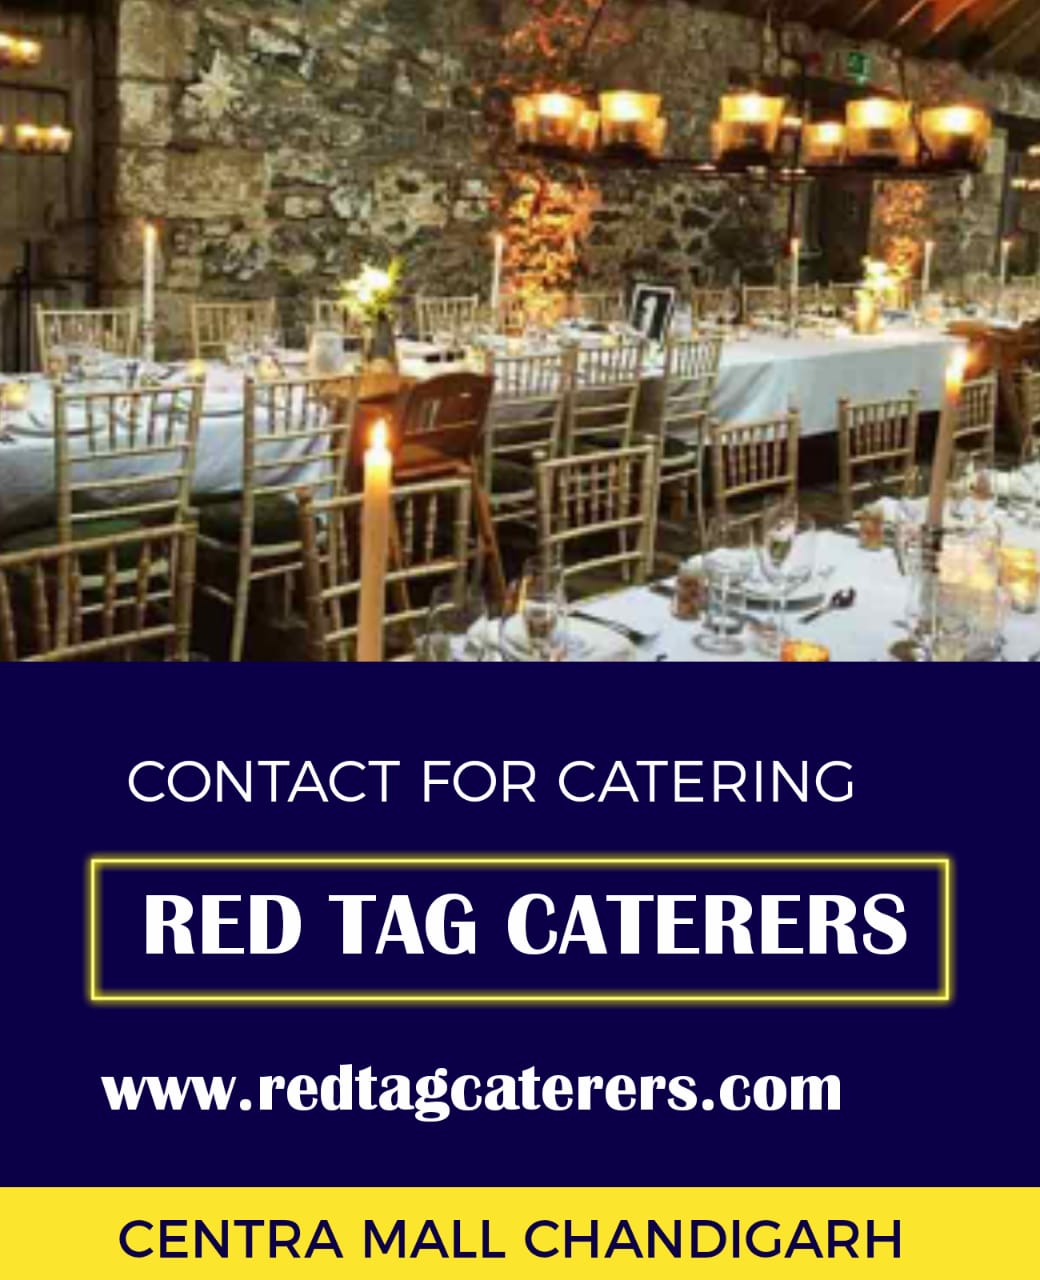 RED TAG caterers Chandigarh primarily cater to two market segments.  | Red Tag Caterers | Corporate caterers in Chandigarh city, wedding caterers in Chandigarh city, best food caterers in Chandigarh city, top quality wedding caterers in Chandigarh city, luxury food caterers in Chandigarh c - GL46301